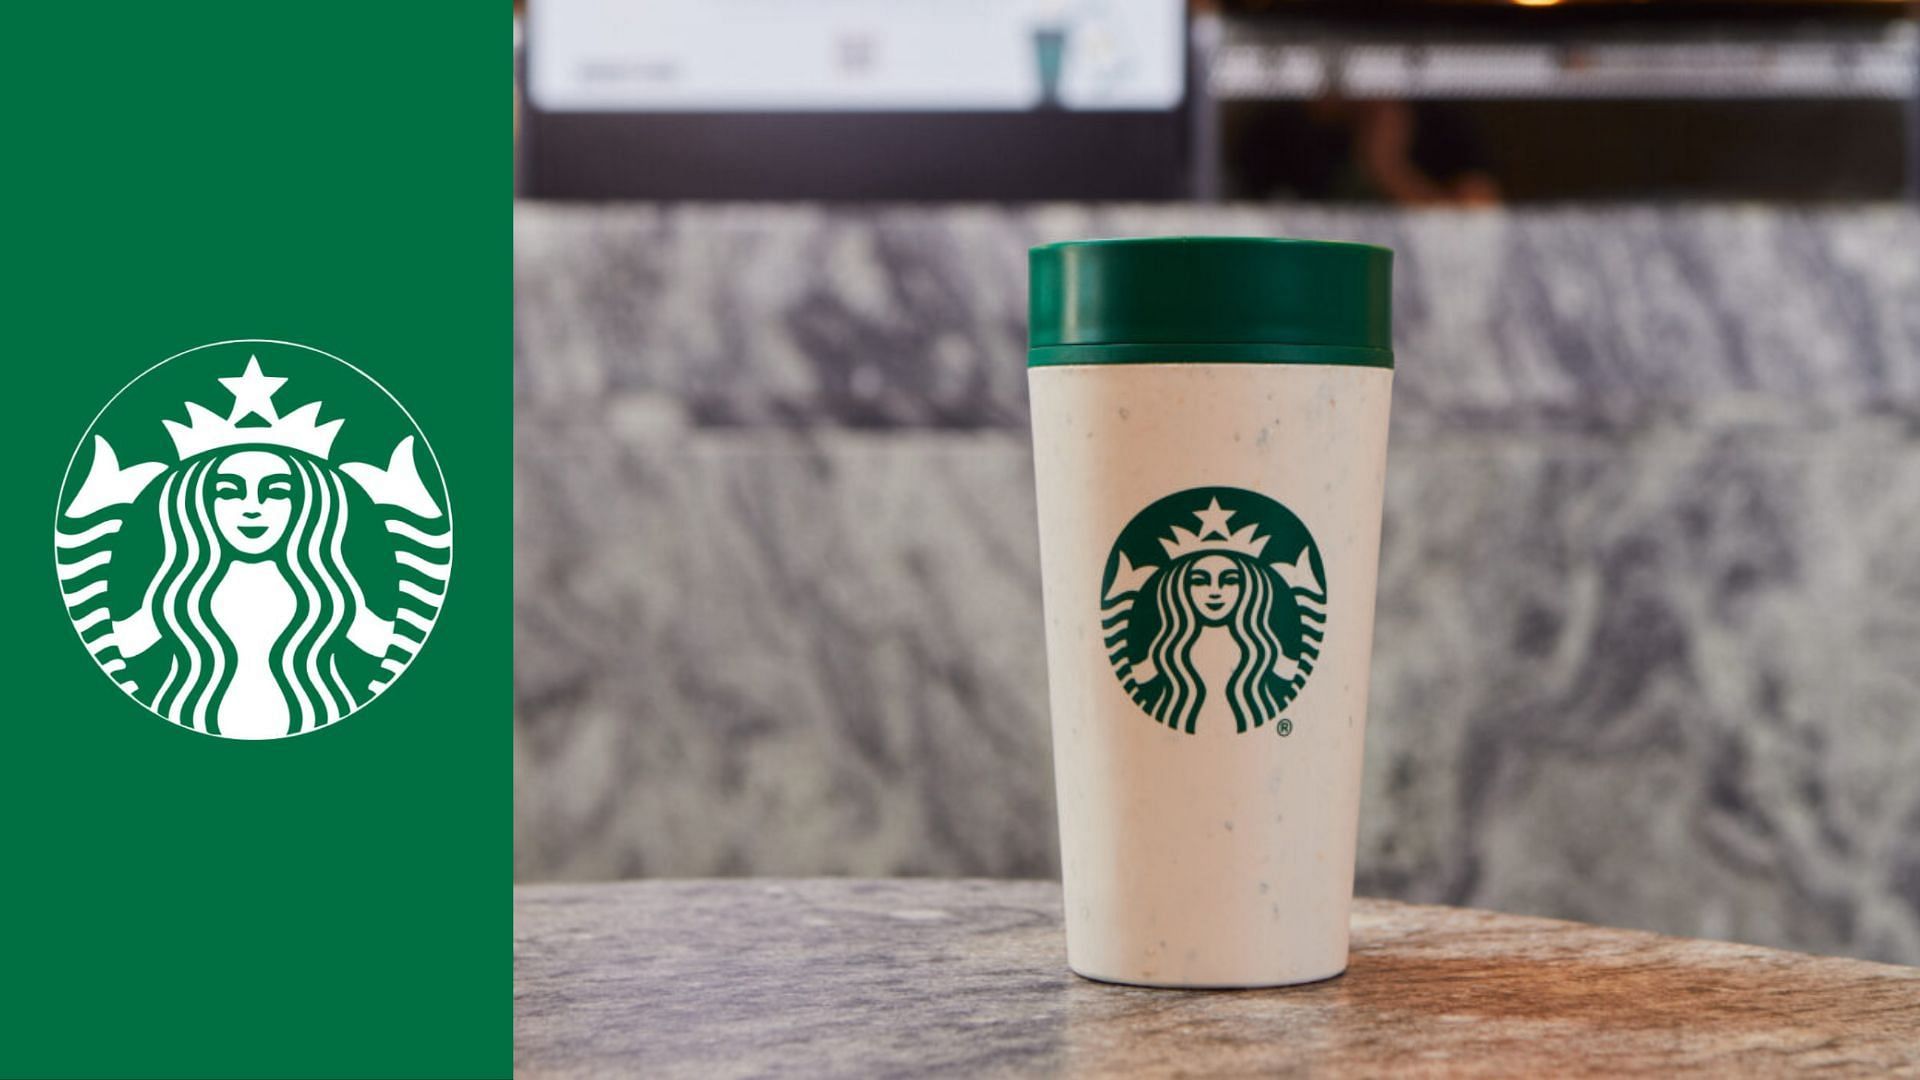 Starbucks has introduced new eco-friendly cups for its core range of cups (Image via Nicholas Matthews Photography/Starbucks)